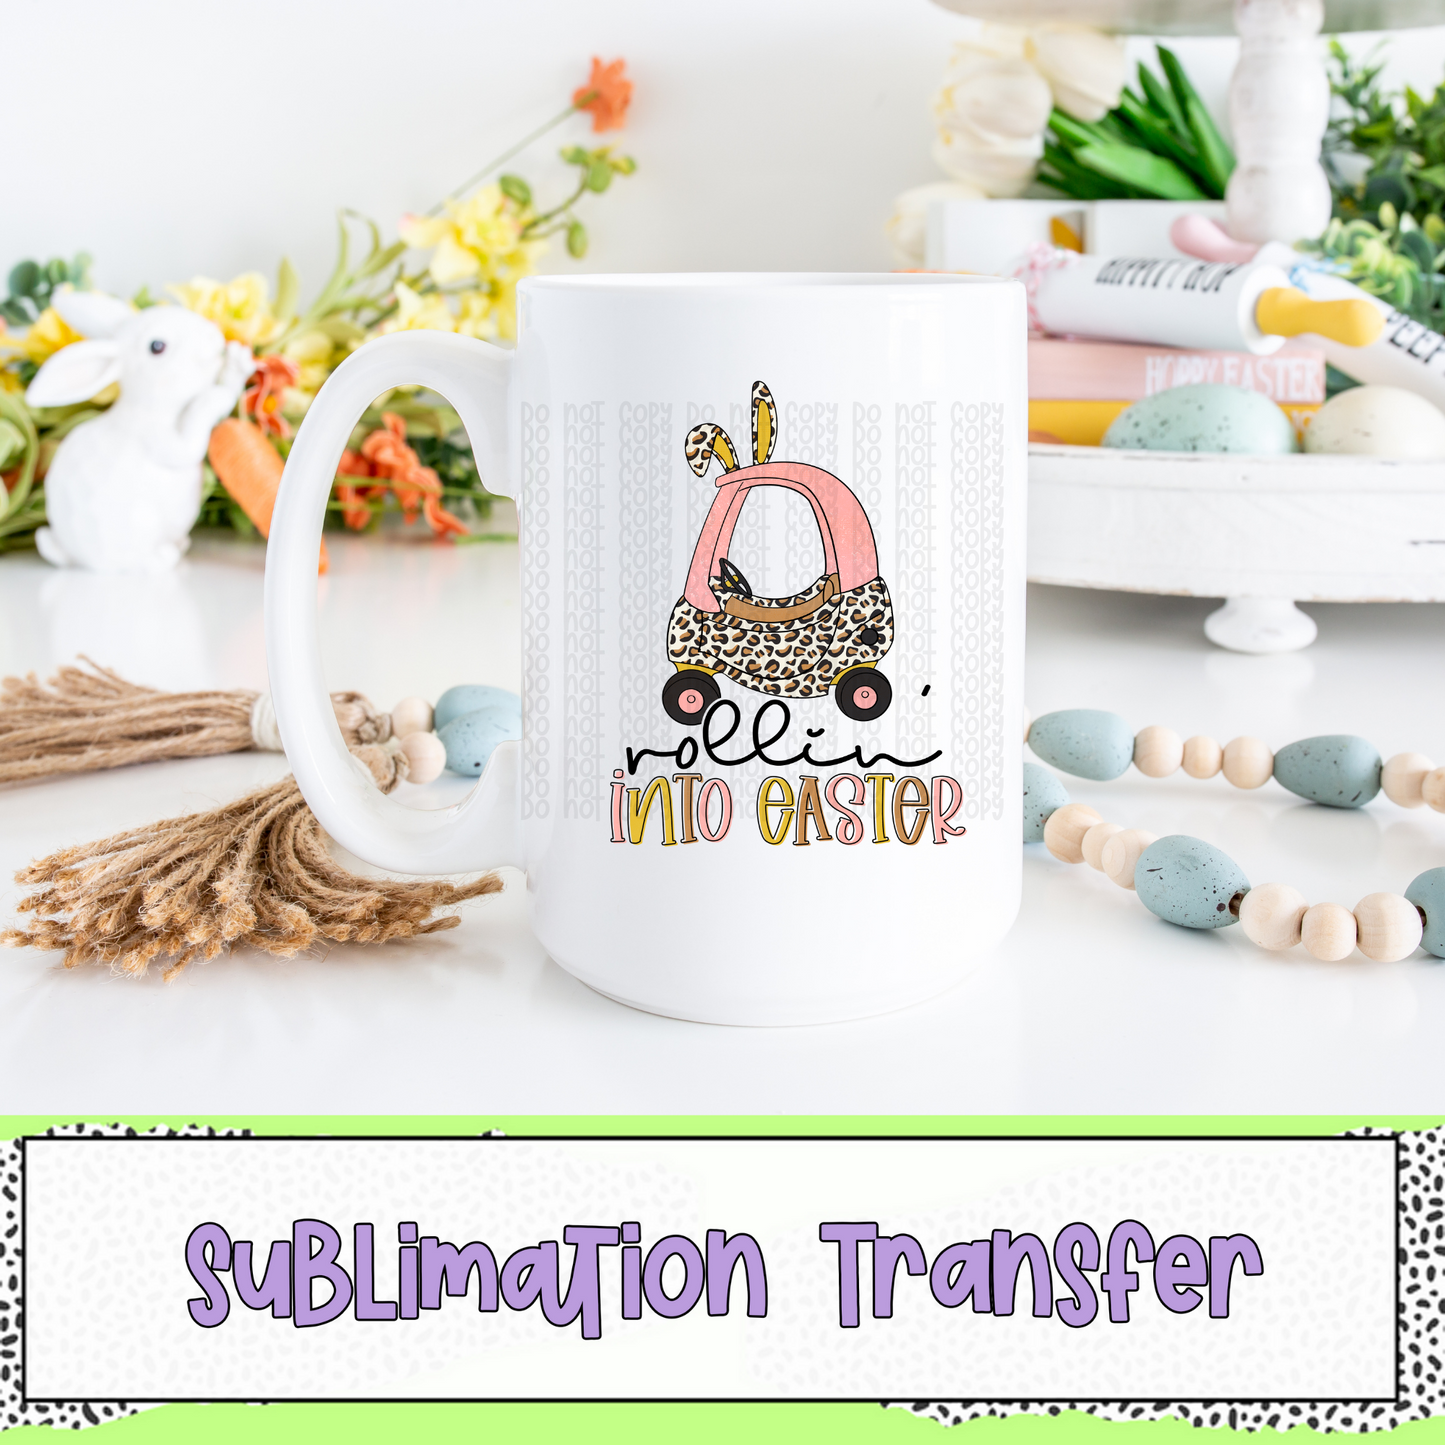 Rollin' into Easter - SUBLIMATION TRANSFER